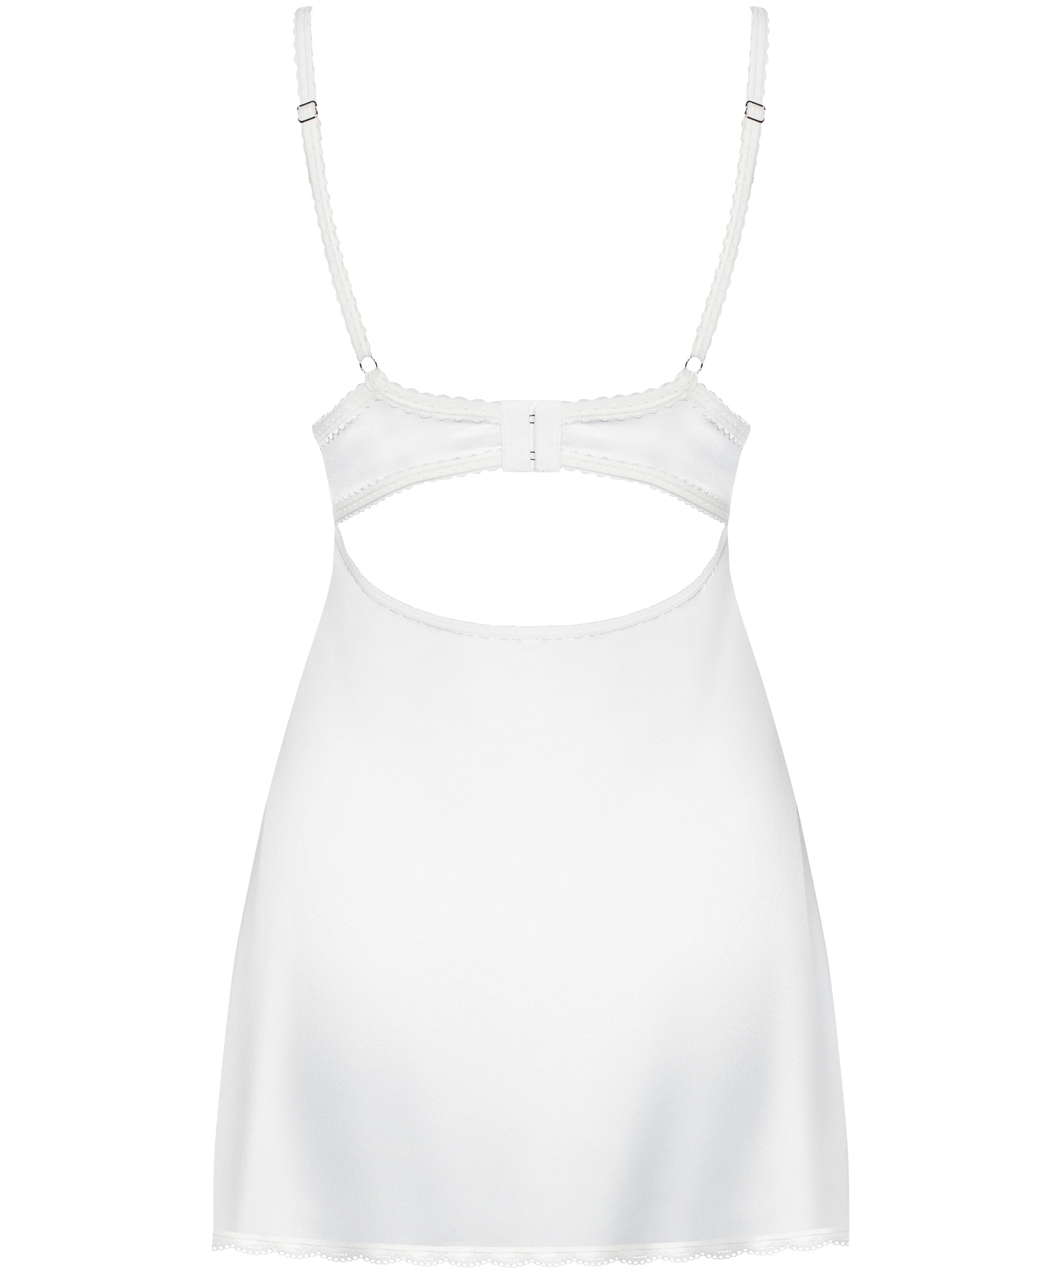 Obsessive white satin chemise with padded cups